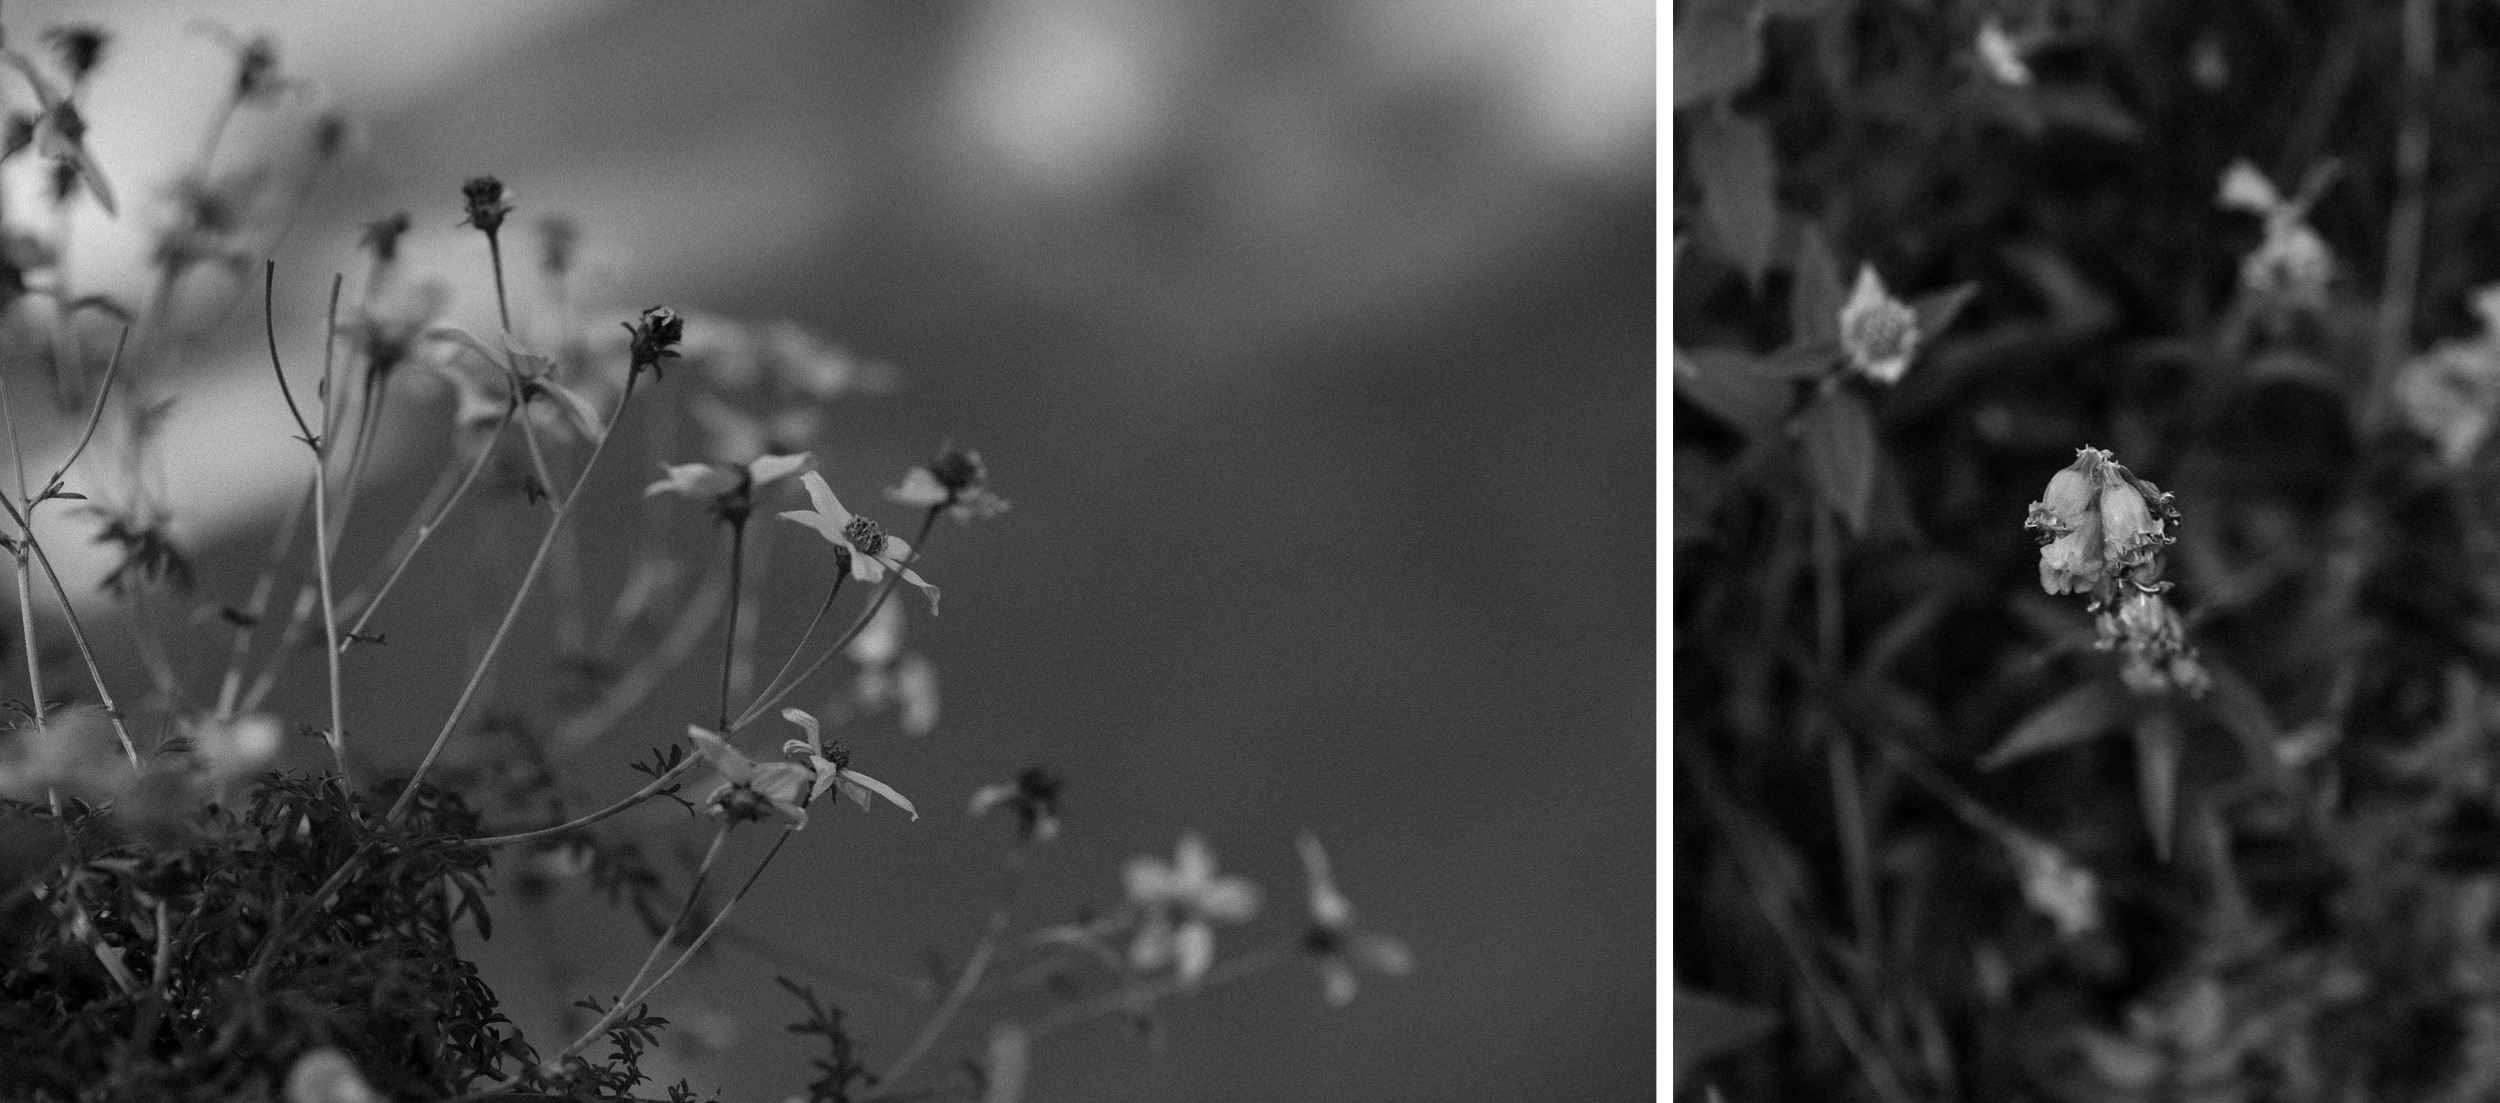 Black and white photos of flowers at Inn of the Turquoise Bear | Santa Fe lesbian elopement | Santa Fe elopement photographer | Santa Fe wedding | LGBTQ elopement | Photo by Denver Elopement Photographer Ashley Joyce Photography, copyright 2021 